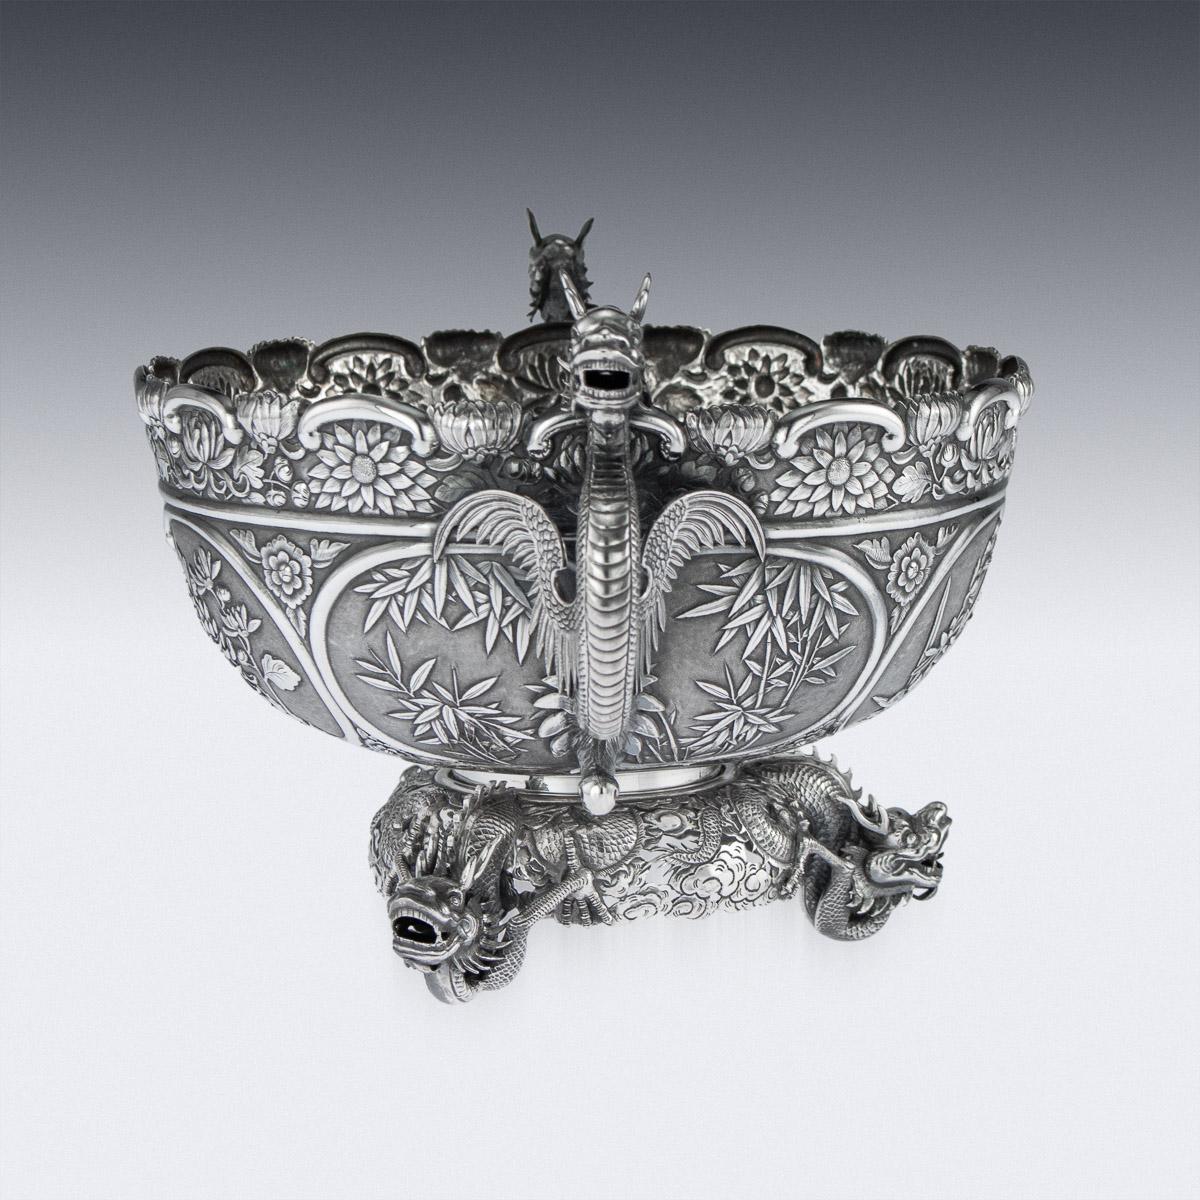 Antique late 19th century Chinese solid silver decorative dragon bowl, of round form with an embossed floral rim, matted ground decorated with four panels. Depicting blossoming cherry trees, chrysanthemums, bamboo and water lilies. The bowl applied